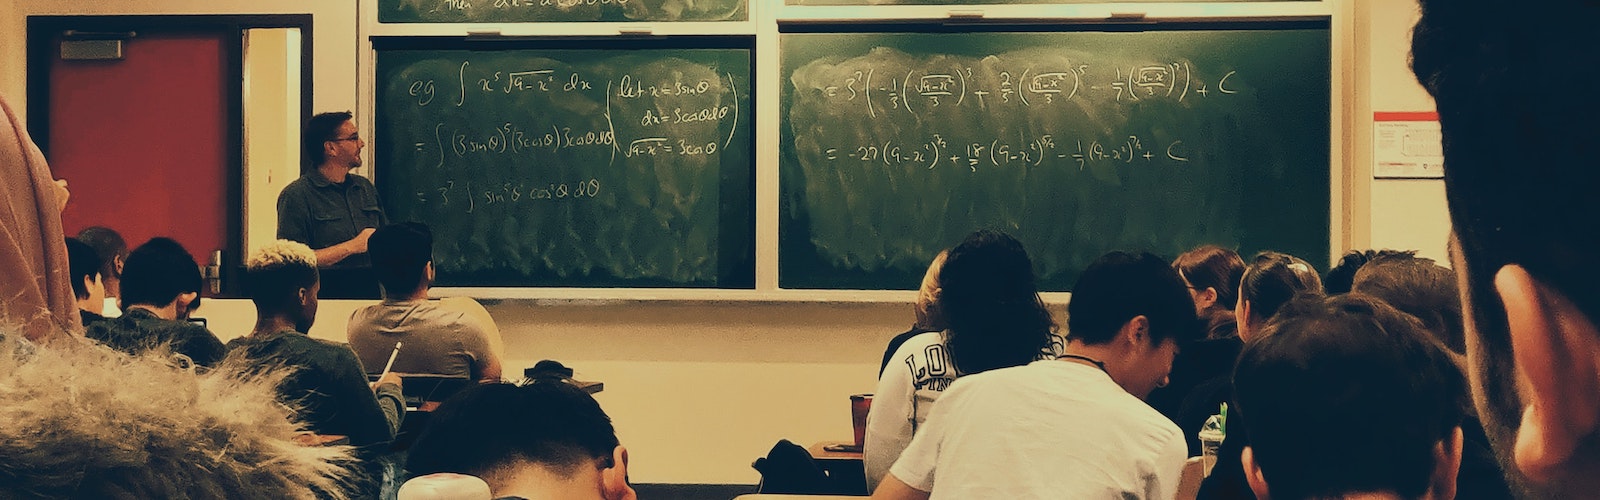 Male instructor presents a math lecture